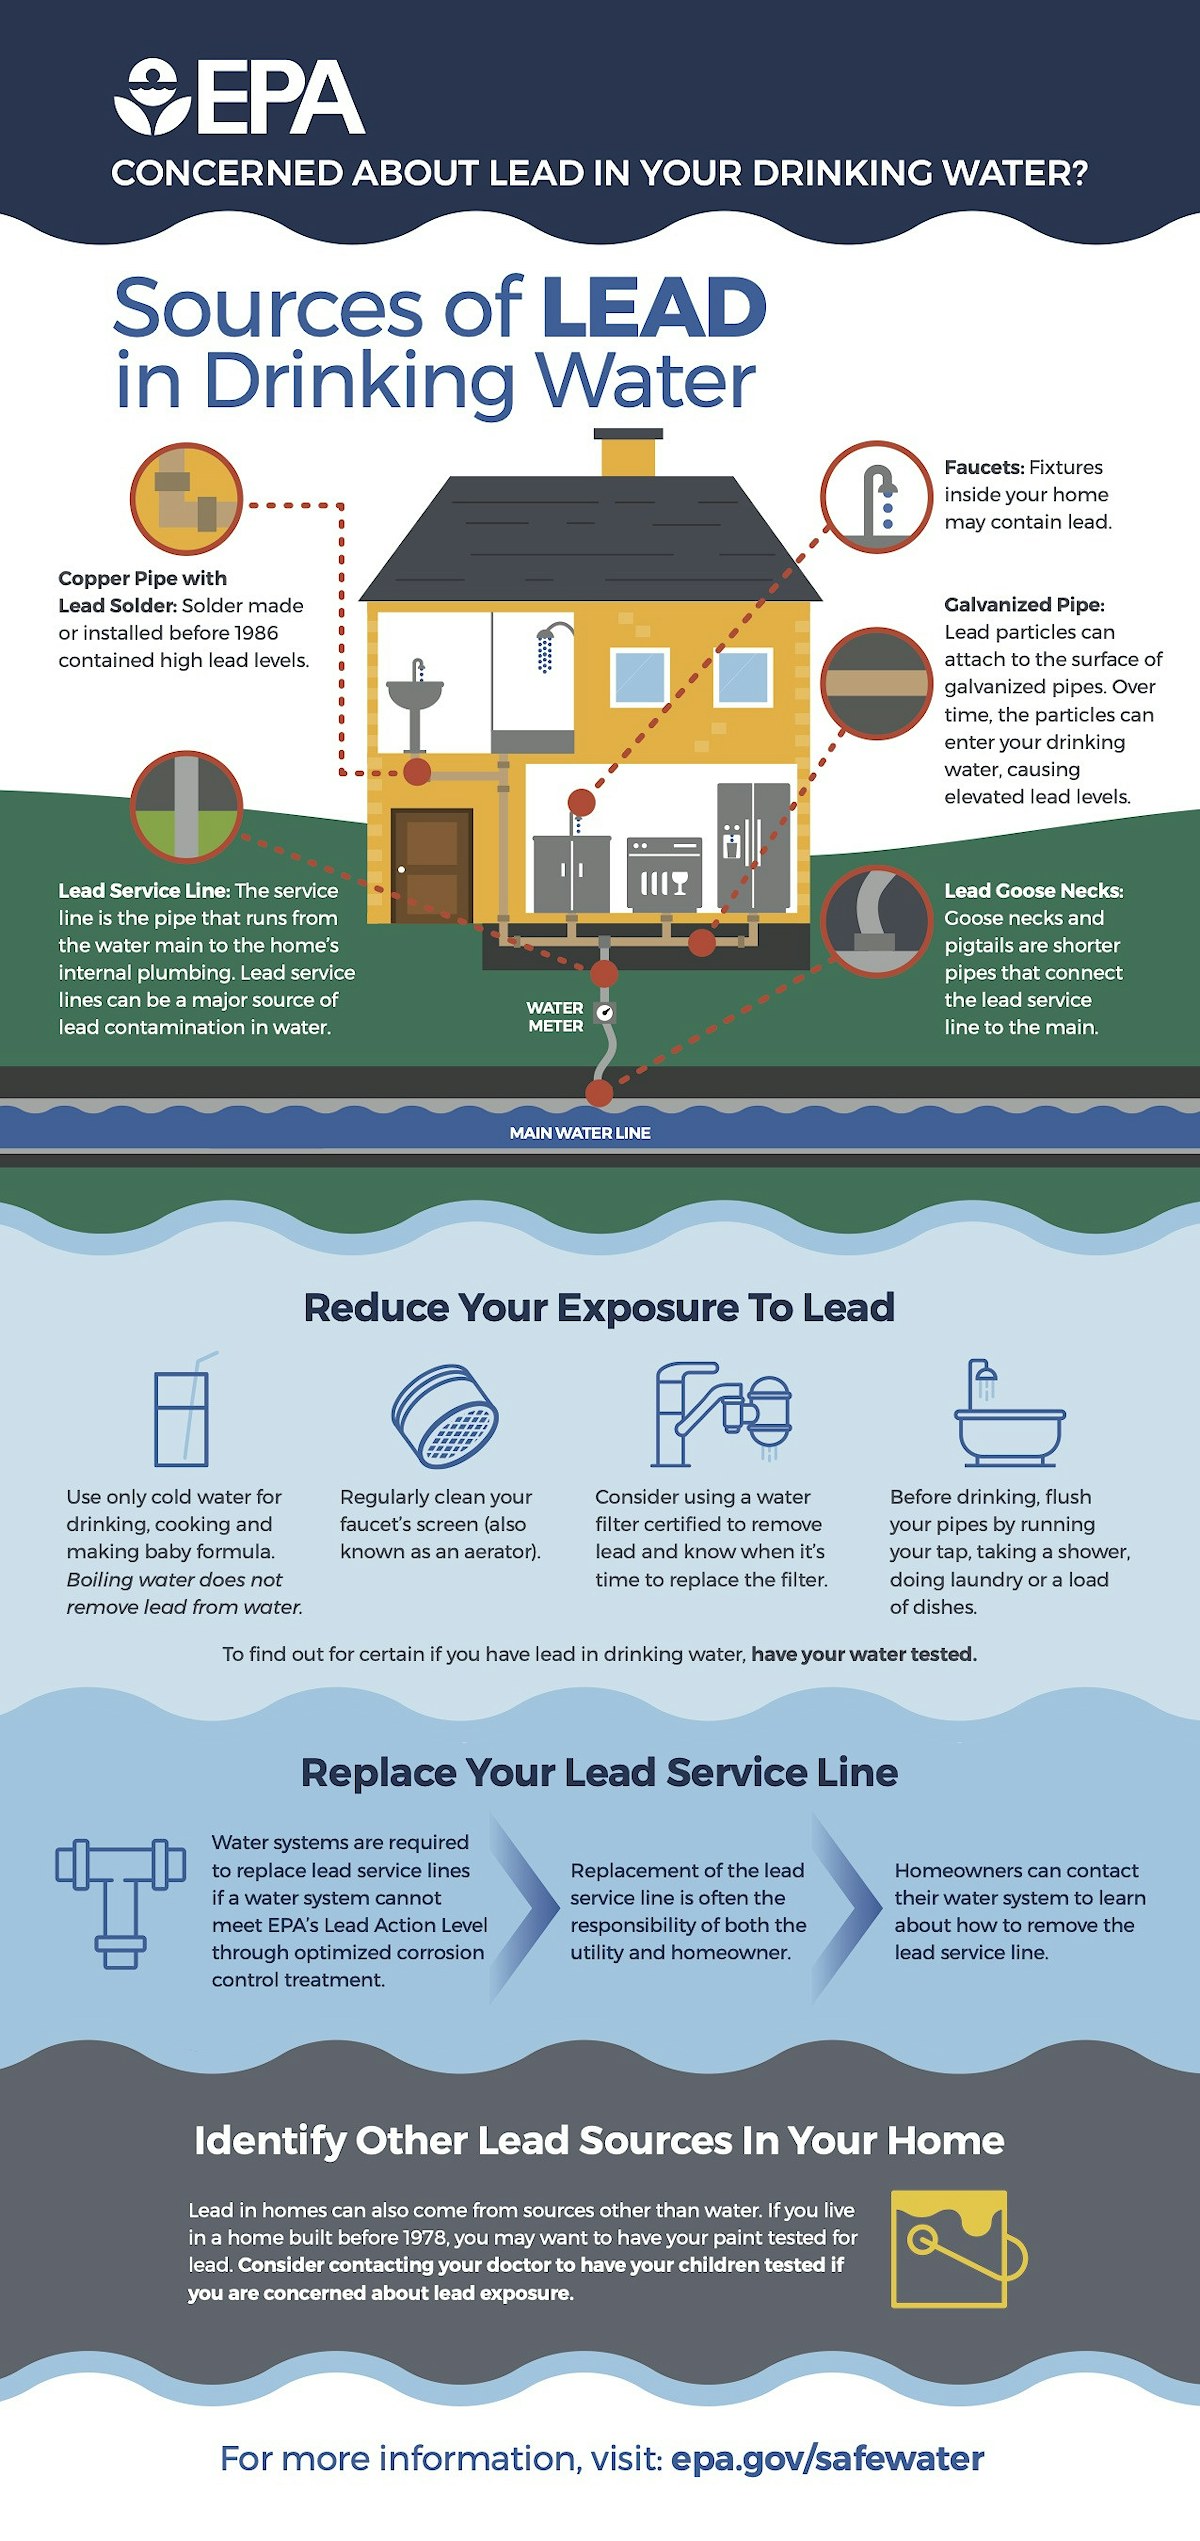 EPA Lead in drinking water infographic